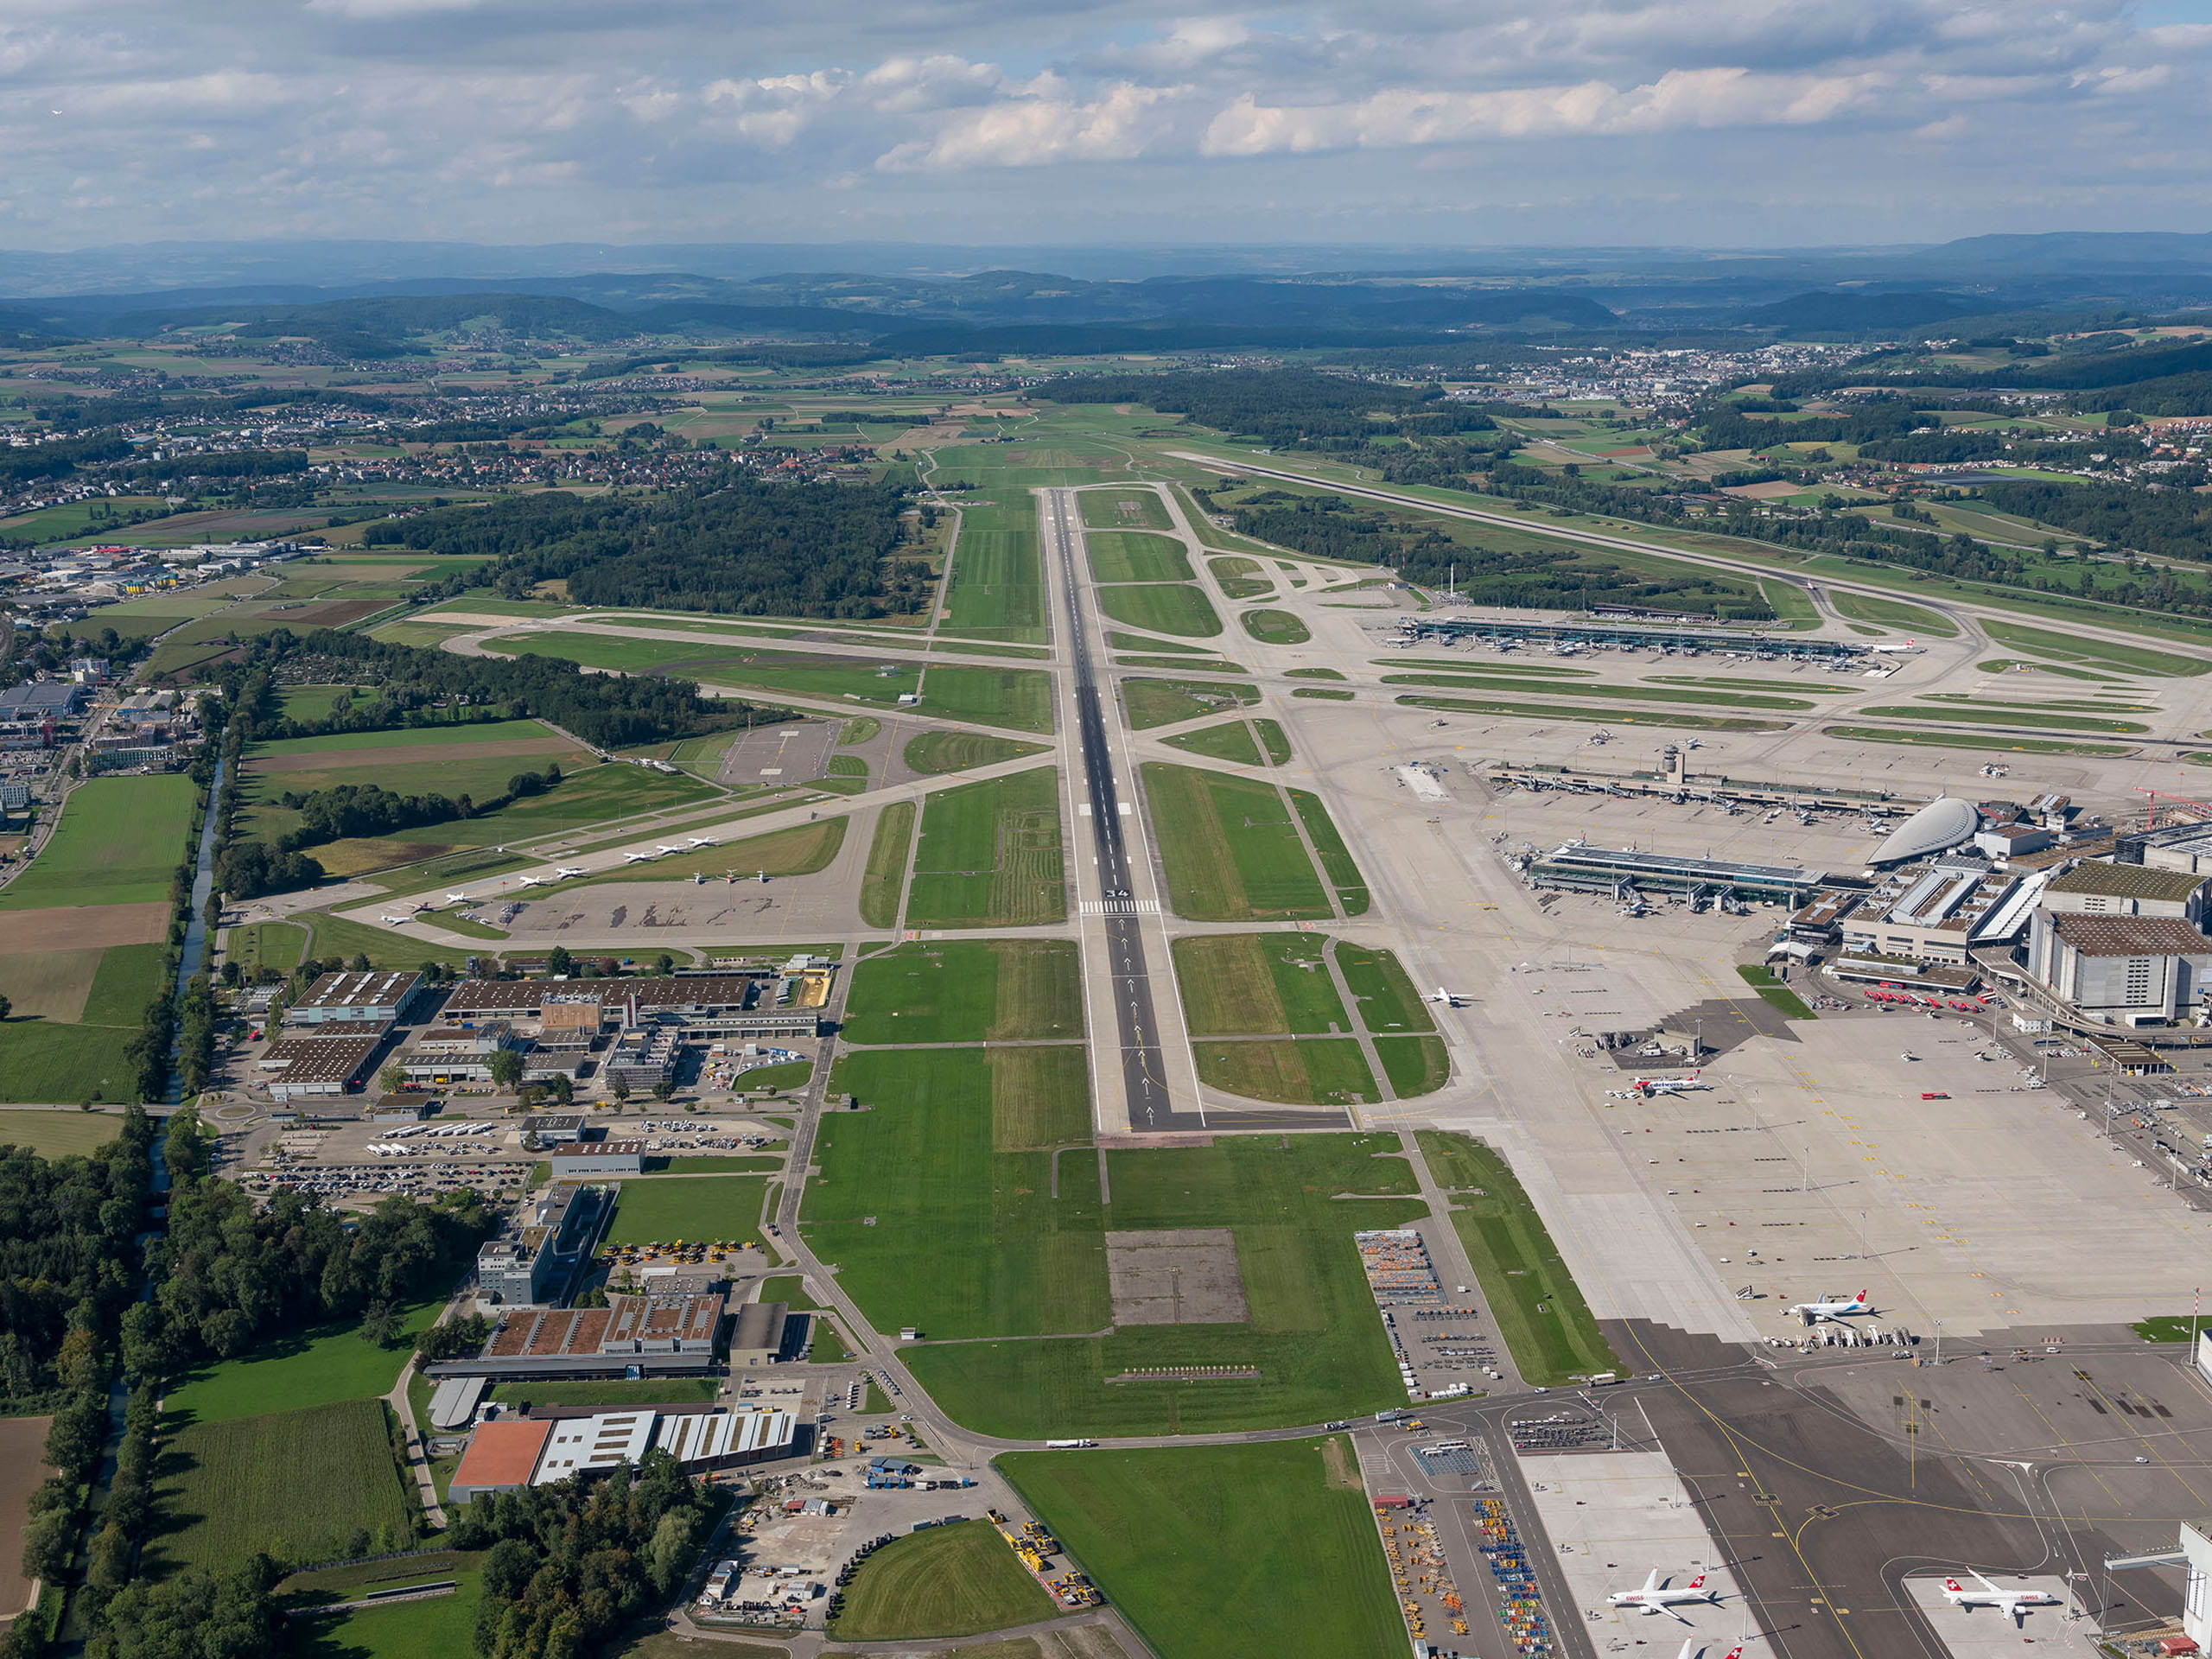 Runways at Zurich Airport from above